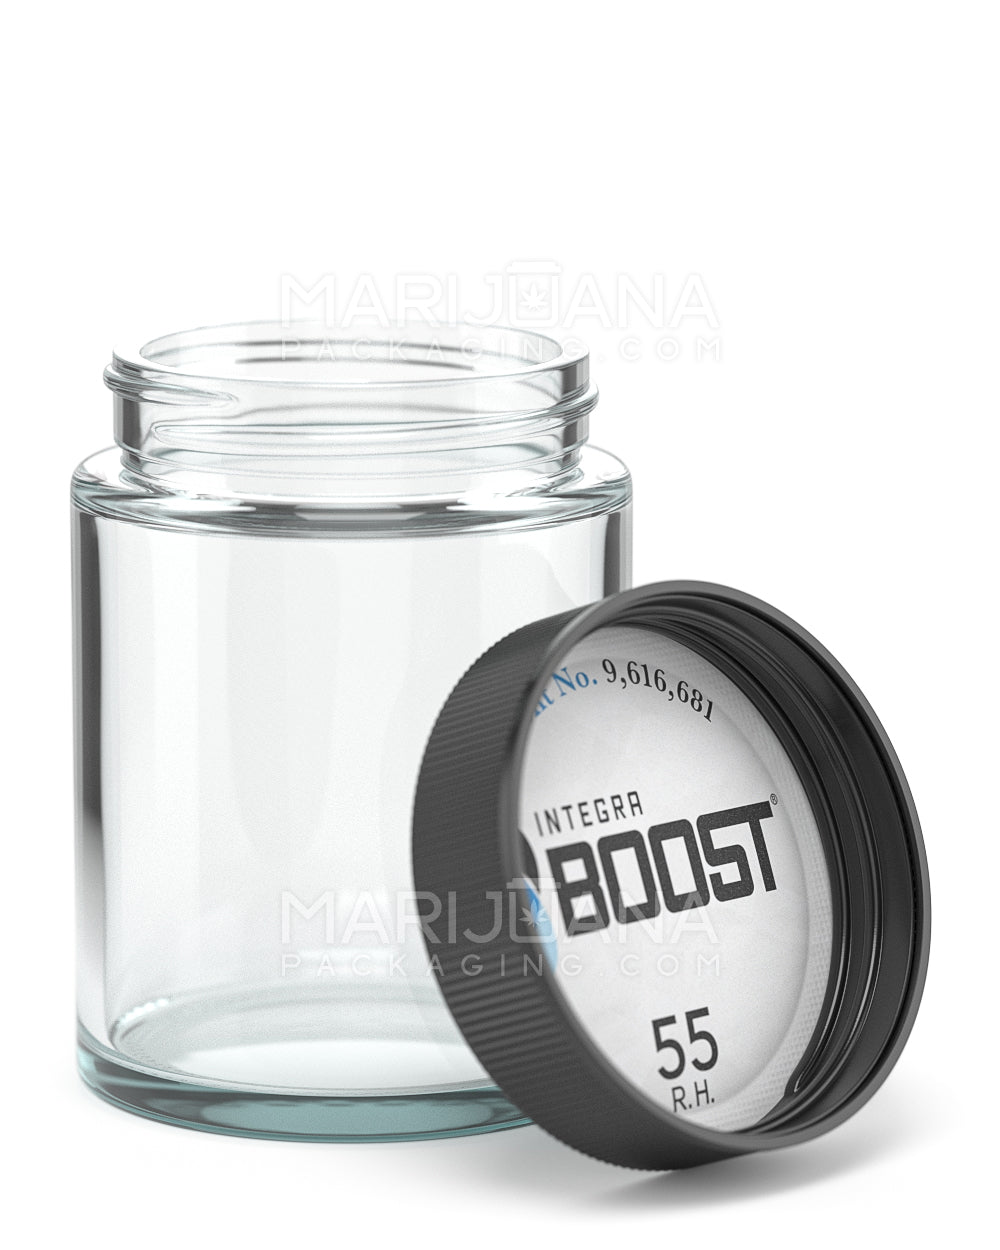 INTEGRA | Boost Humidity Pack | 53mm - 55% - 100 Count - 5